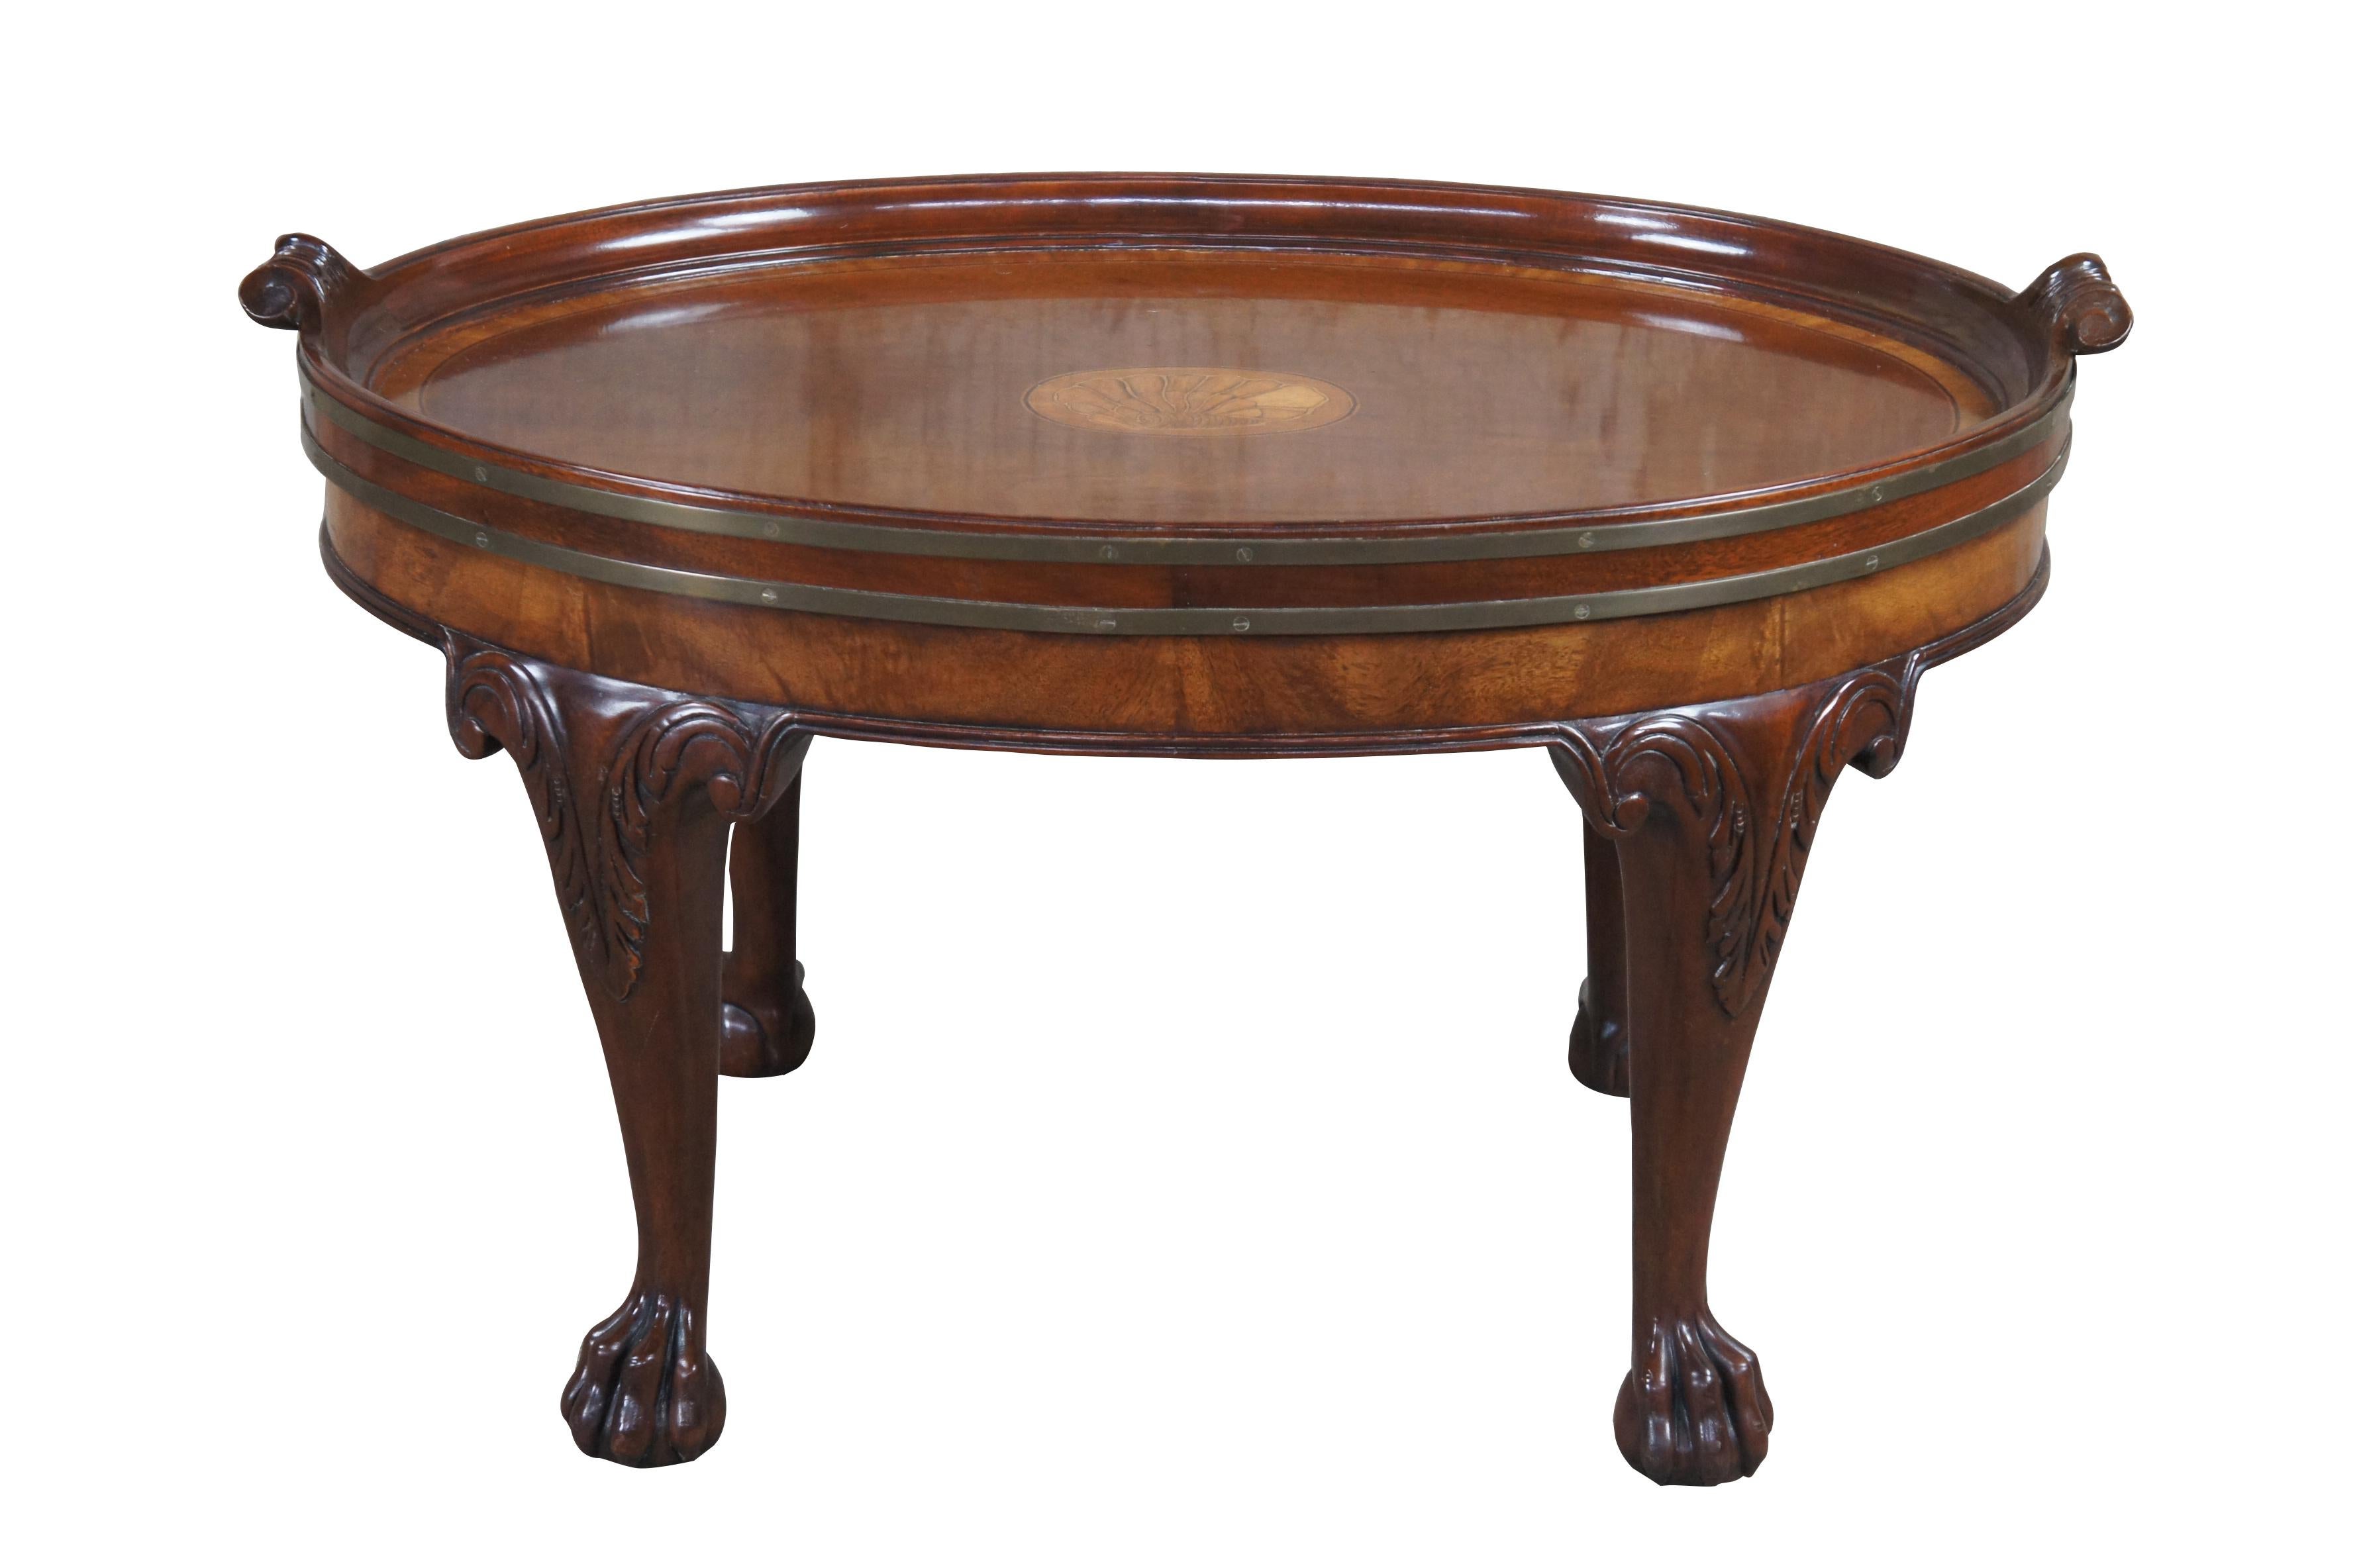 Vintage Baker Furniture Stately Homes Collection coffee table.  Drawing inspiration from English Georgian and Chippendale styling.  Made from mahogany and satinwood with an oval form and tray style inset top.  Features marquetry inlay with sea shell